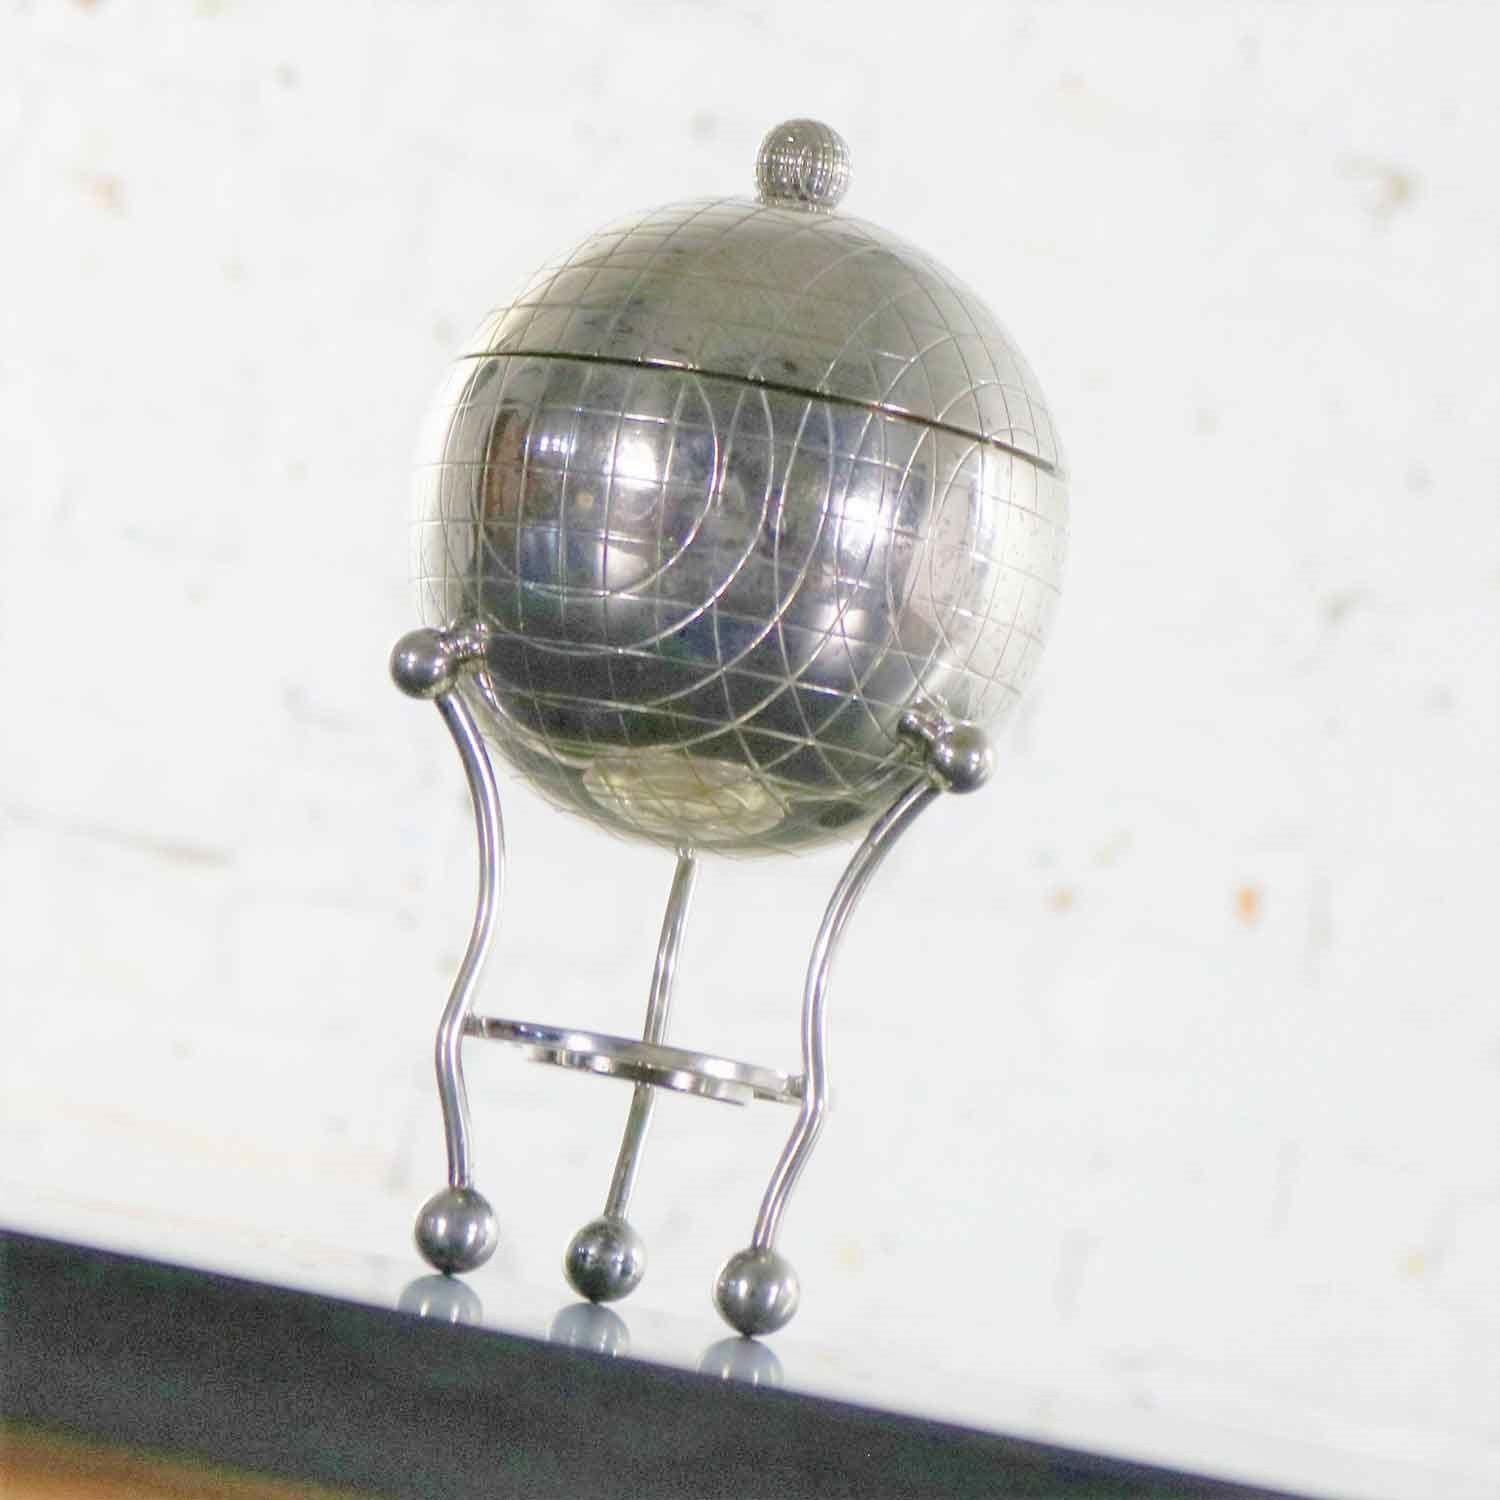 Unique Victorian silver plate egg warmer in a globe or orb shape by Thomas Latham and Ernest Morton for Latham & Morton of Birmingham. It has all the appropriate hallmarks, pseudo hallmarks, and trademarks. It is in wonderful vintage condition.